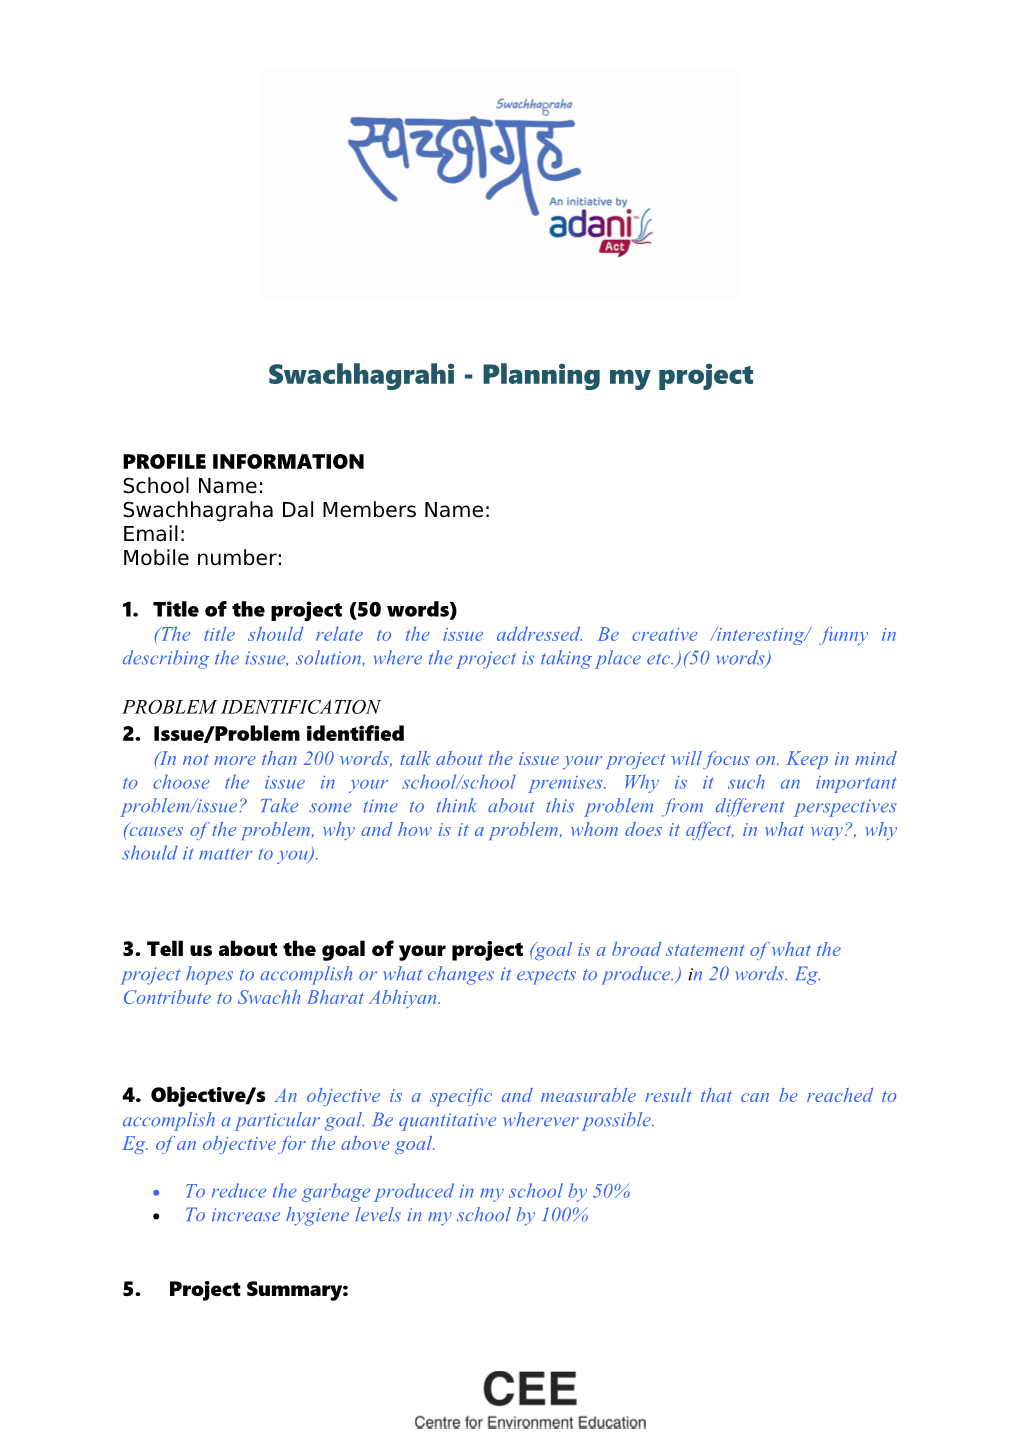 Swachhagrahi - Planning My Project